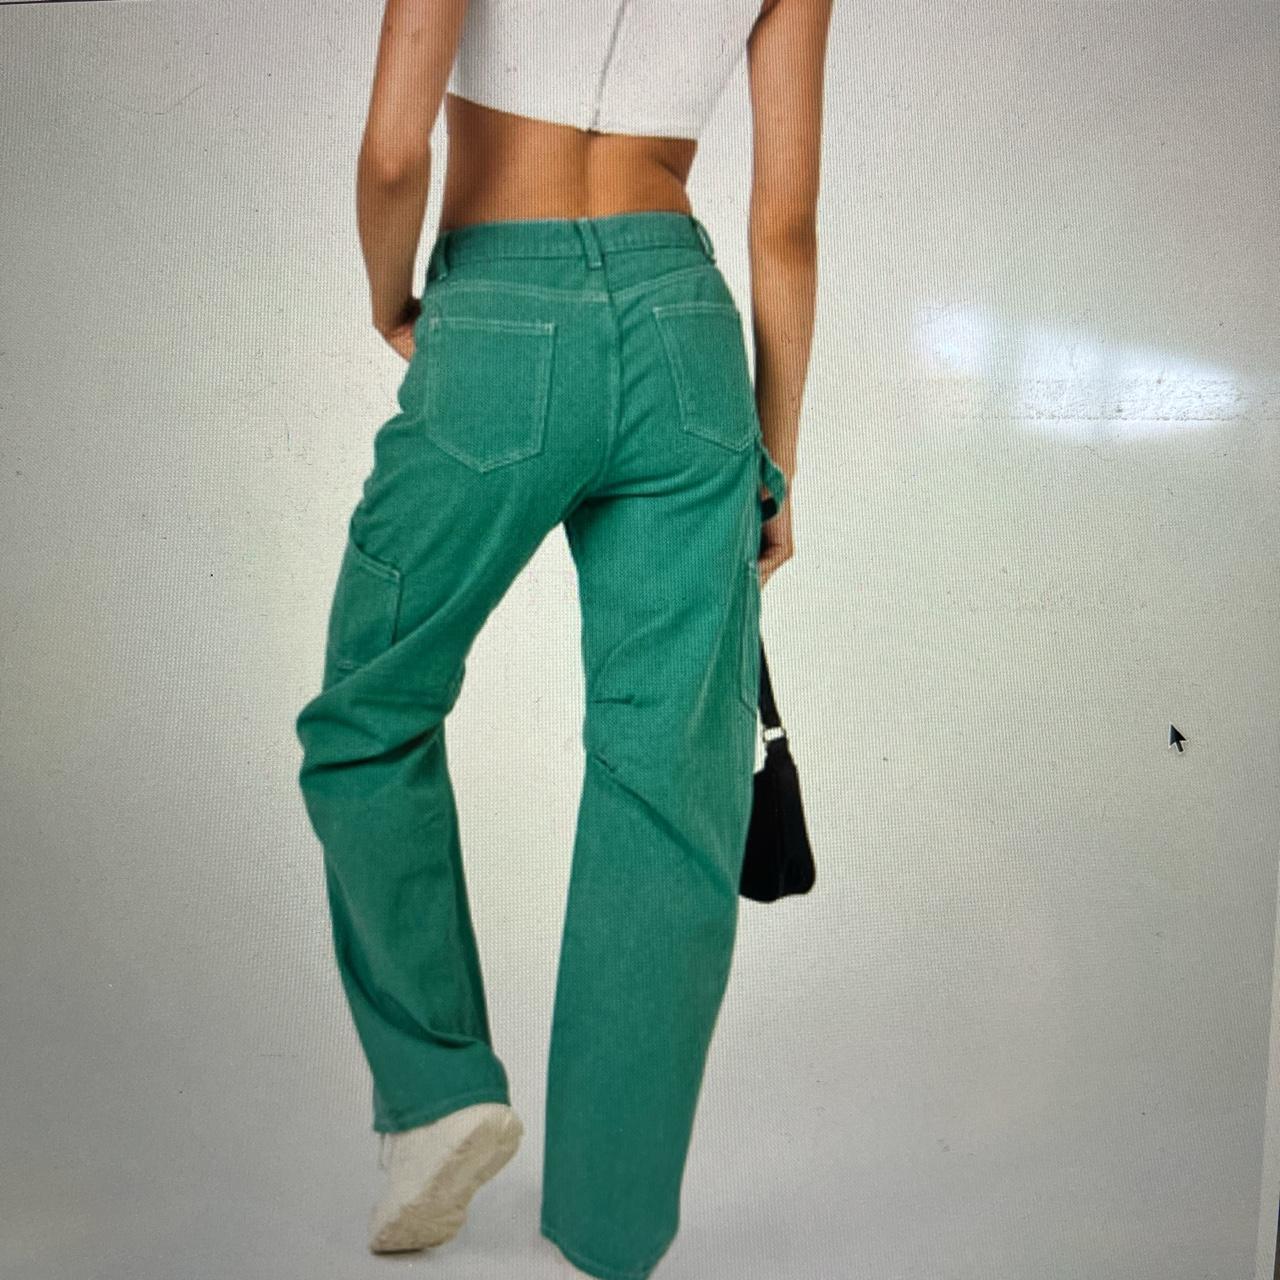 MIAMI VICE PANTS GREEN 🐸 Lioness bought from... - Depop